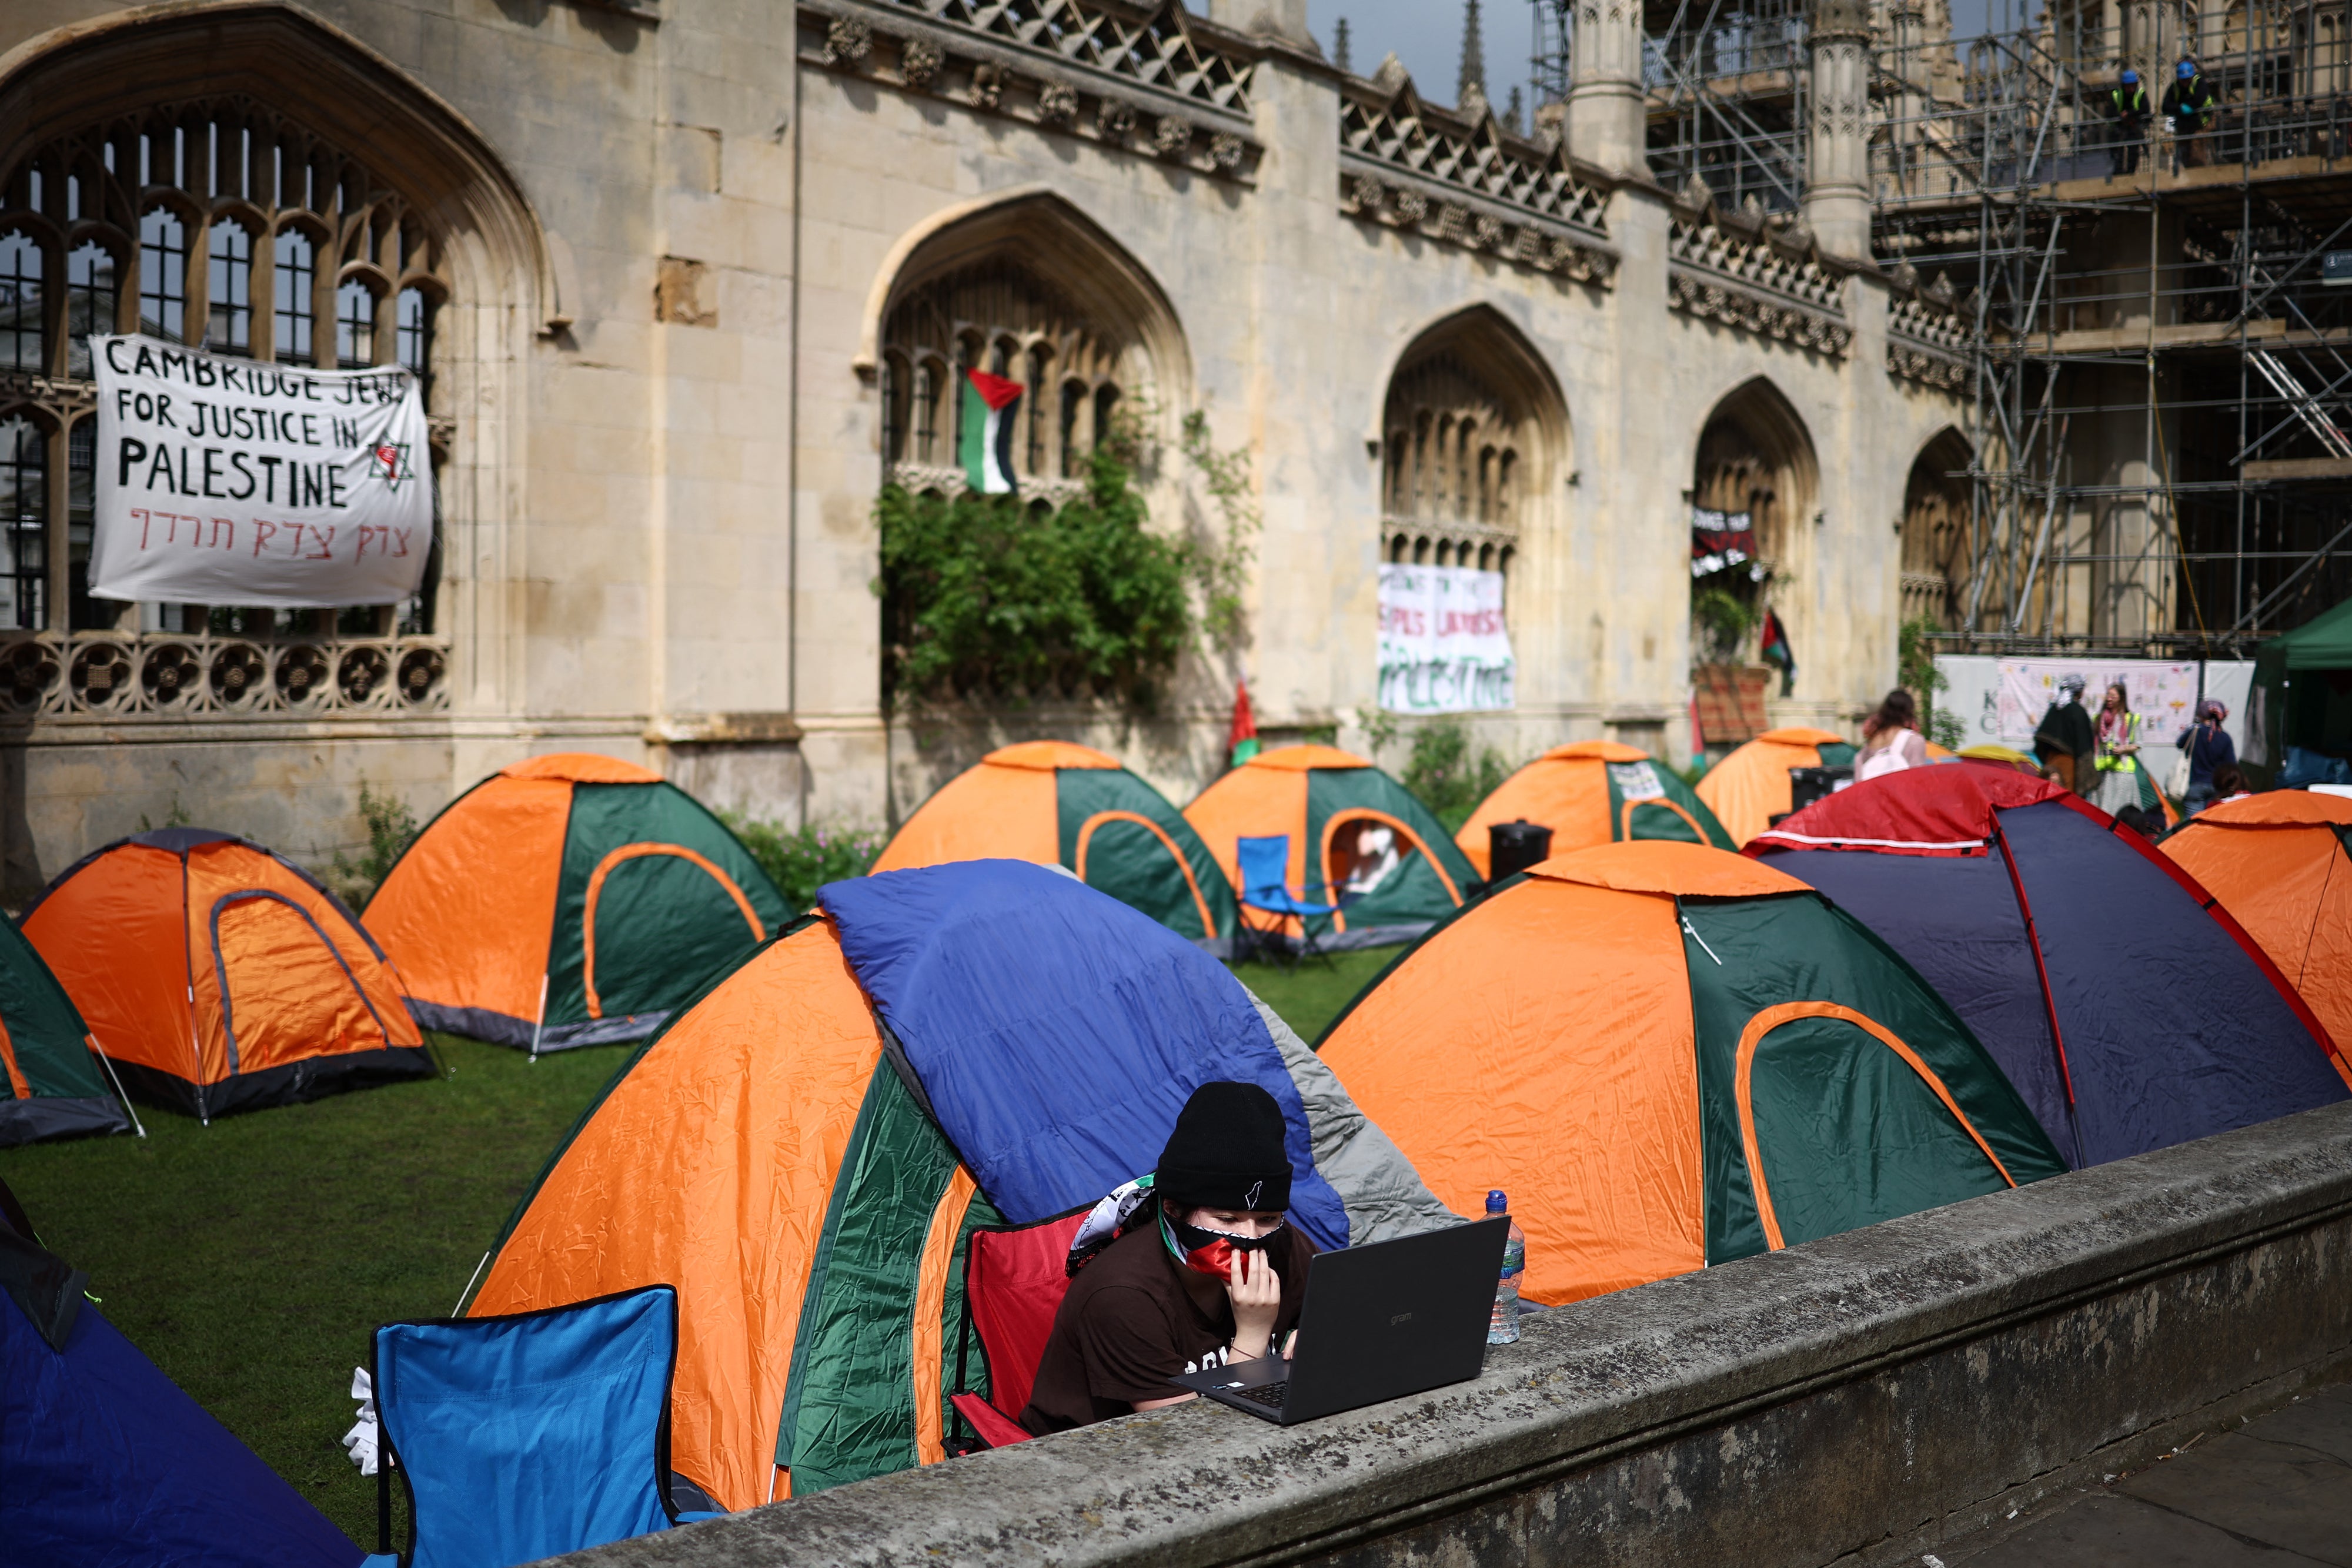 A person works on a laptop computer as they sit by tents during a protest in support of Palestinian people, at King’s College at Cambridge